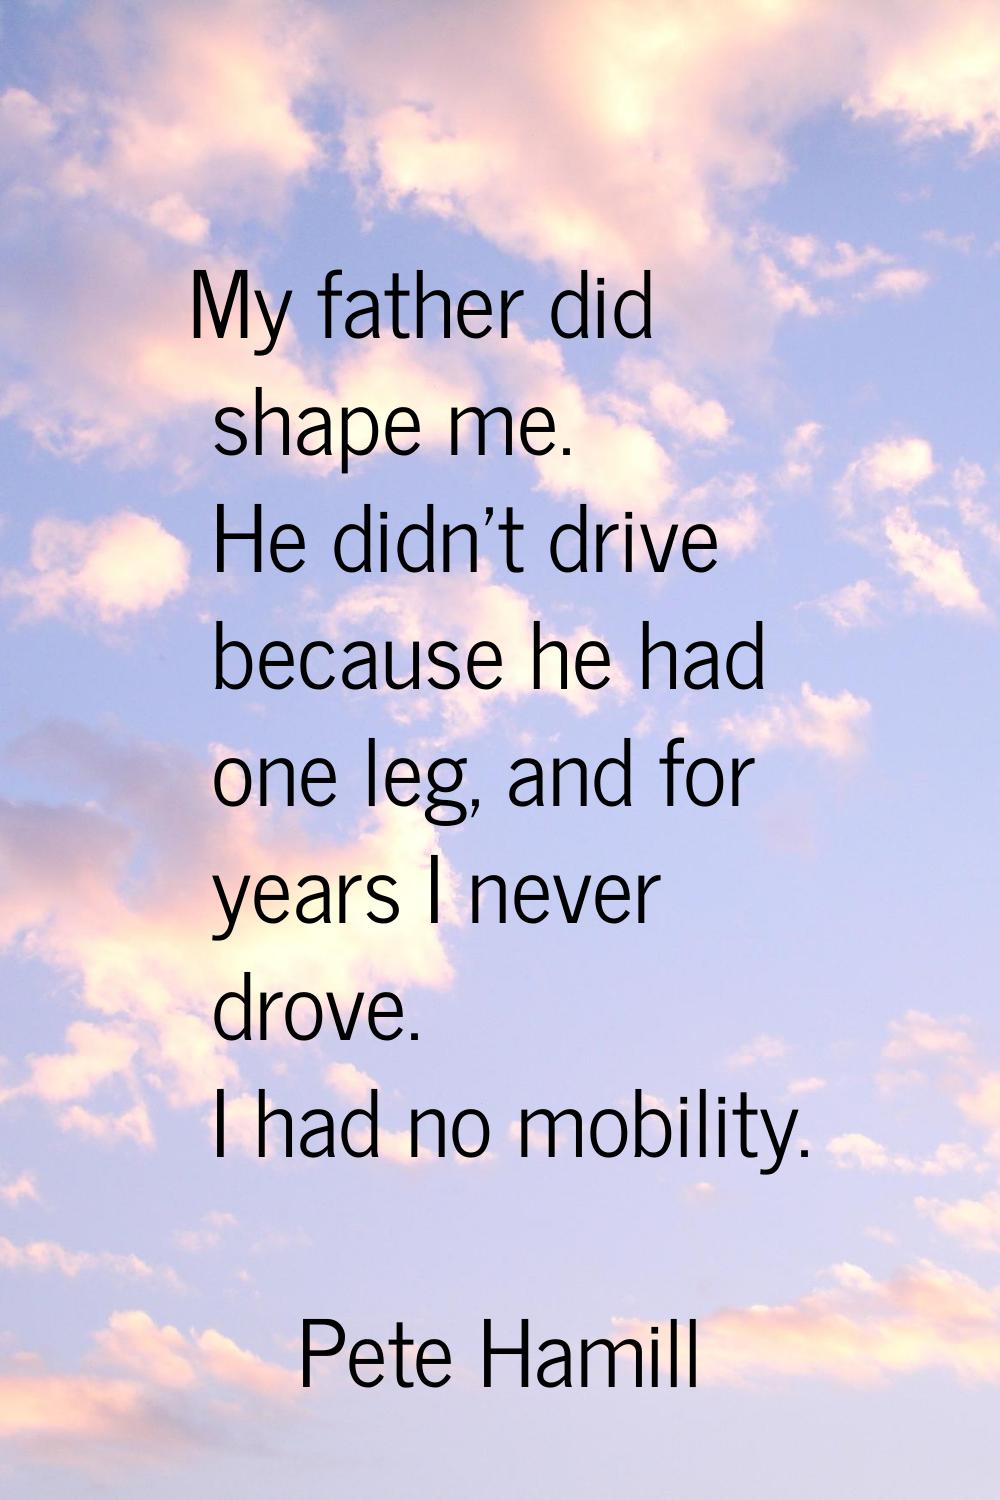 My father did shape me. He didn't drive because he had one leg, and for years I never drove. I had 